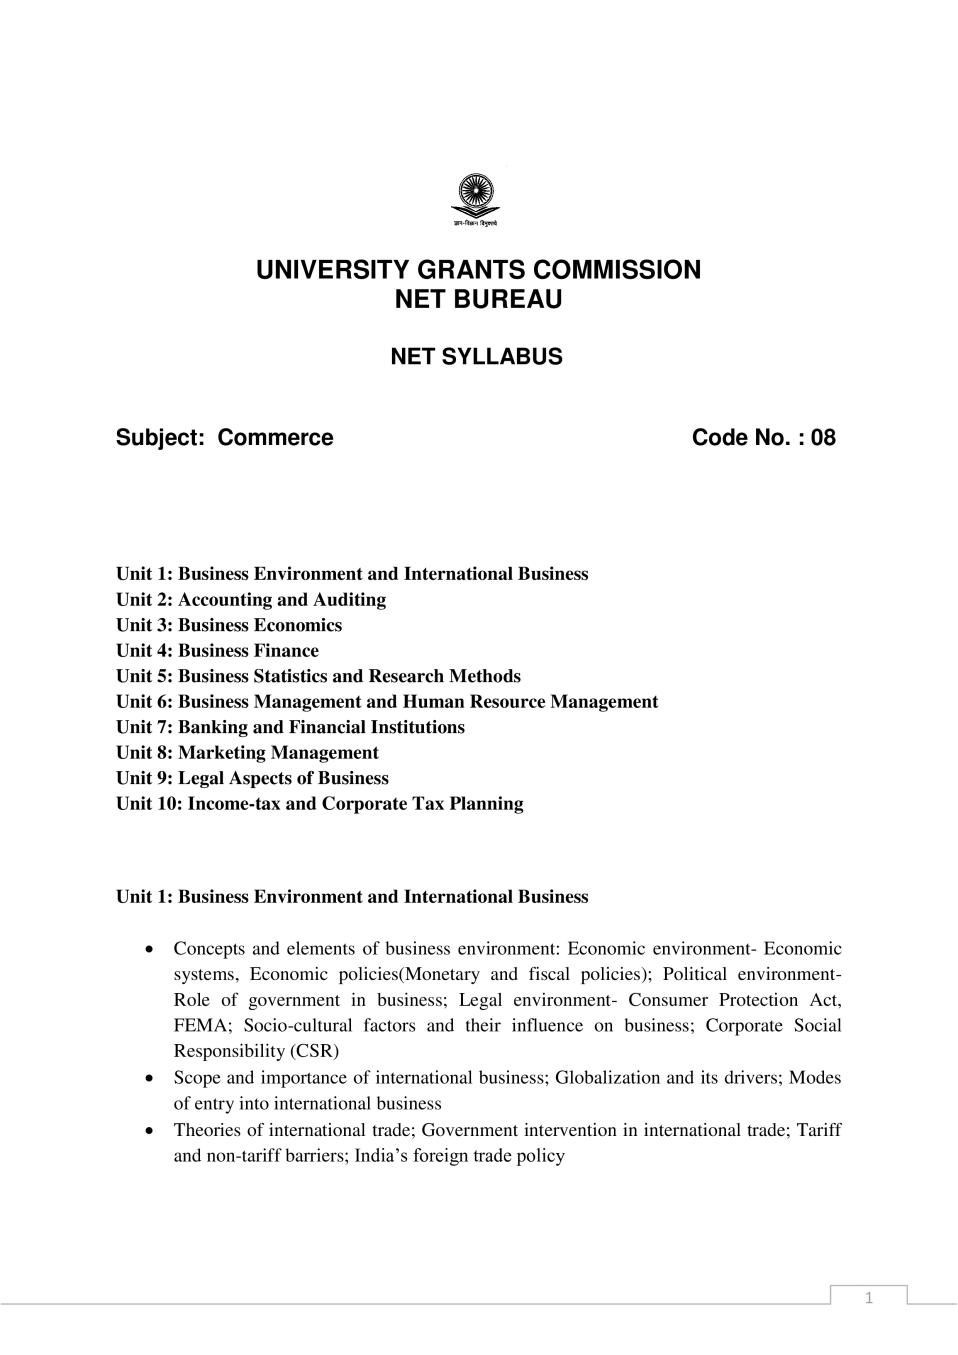 UGC NET Syllabus for Commerce 2020 - Page 1